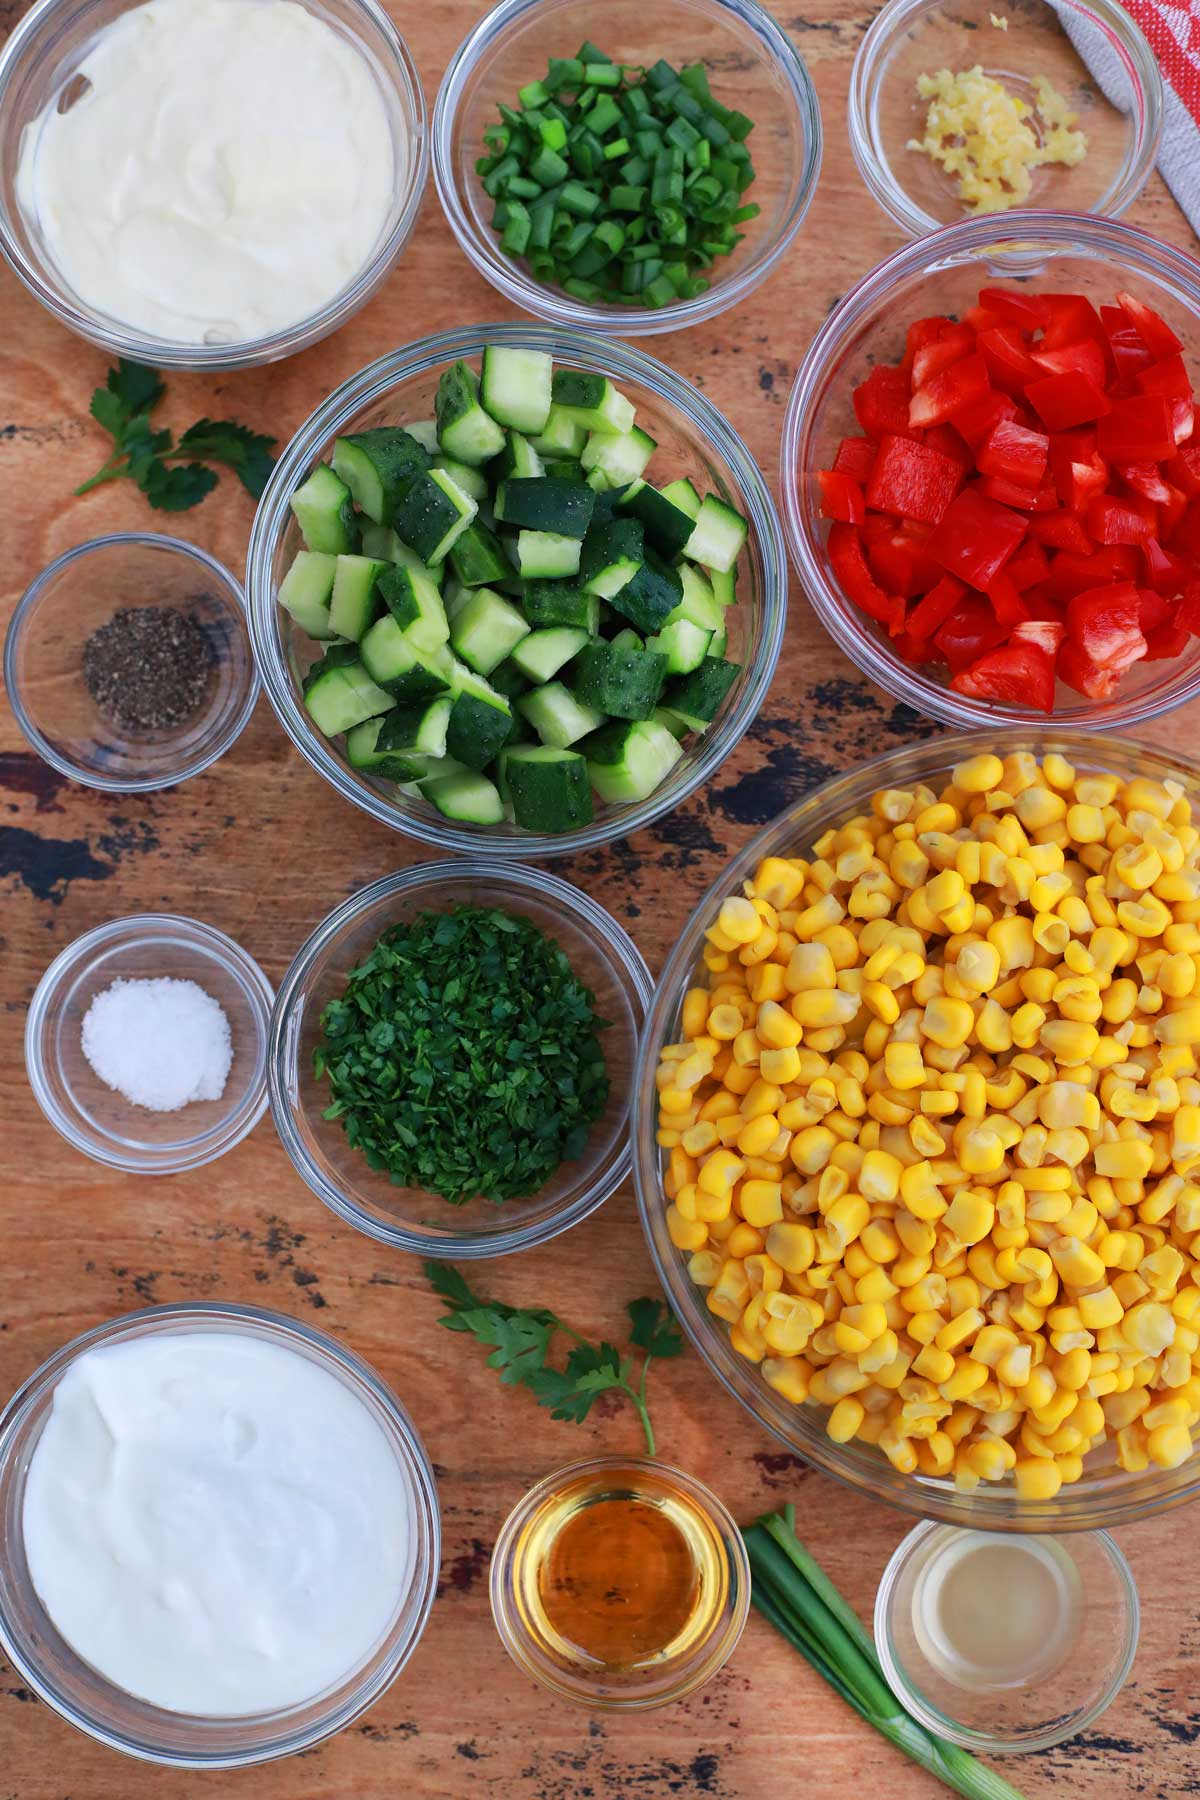 Ingredients for creamy corn salad